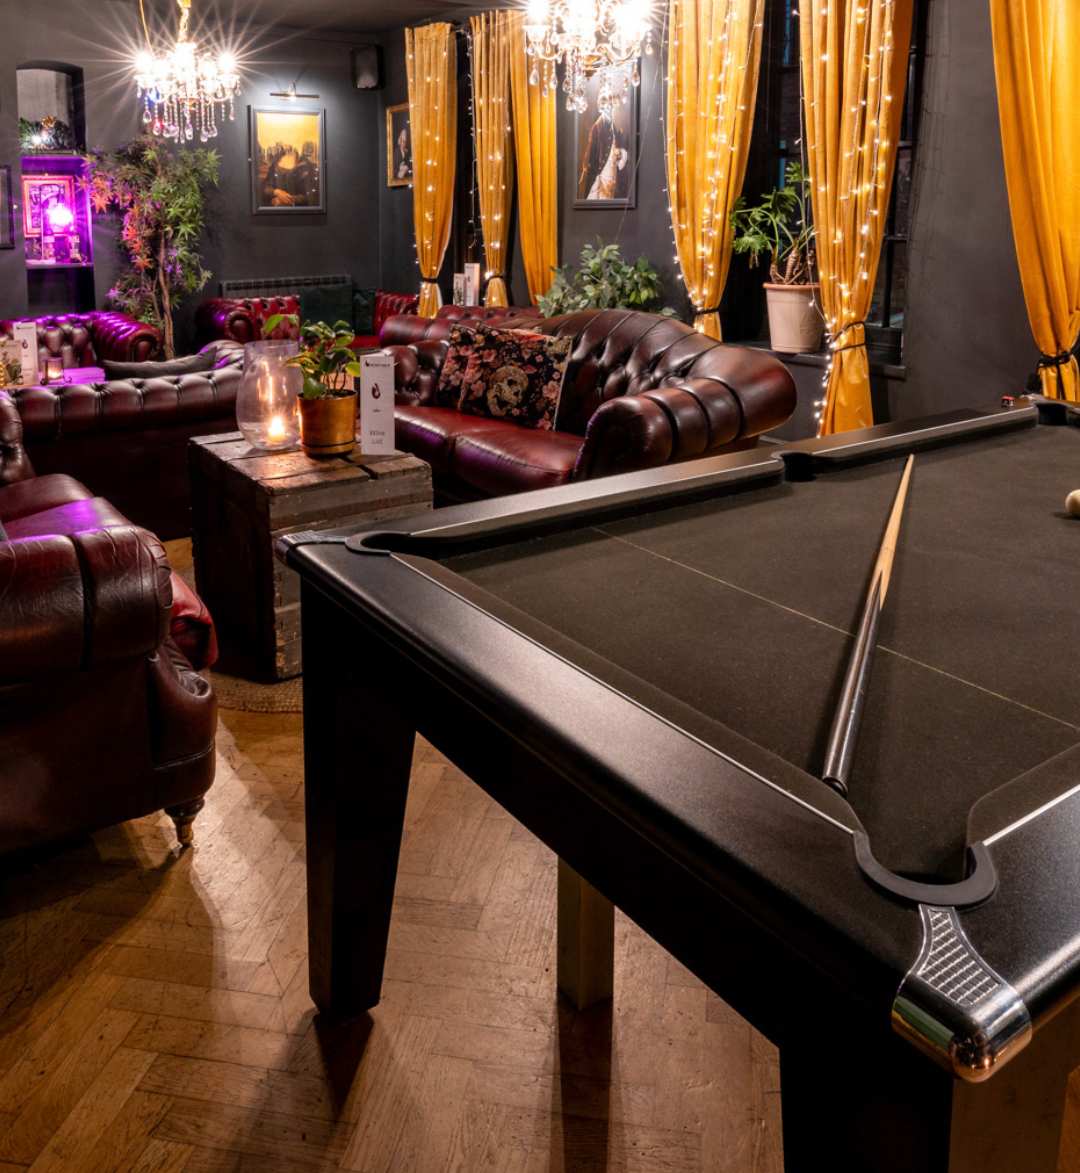 Function Room with pool table and couches